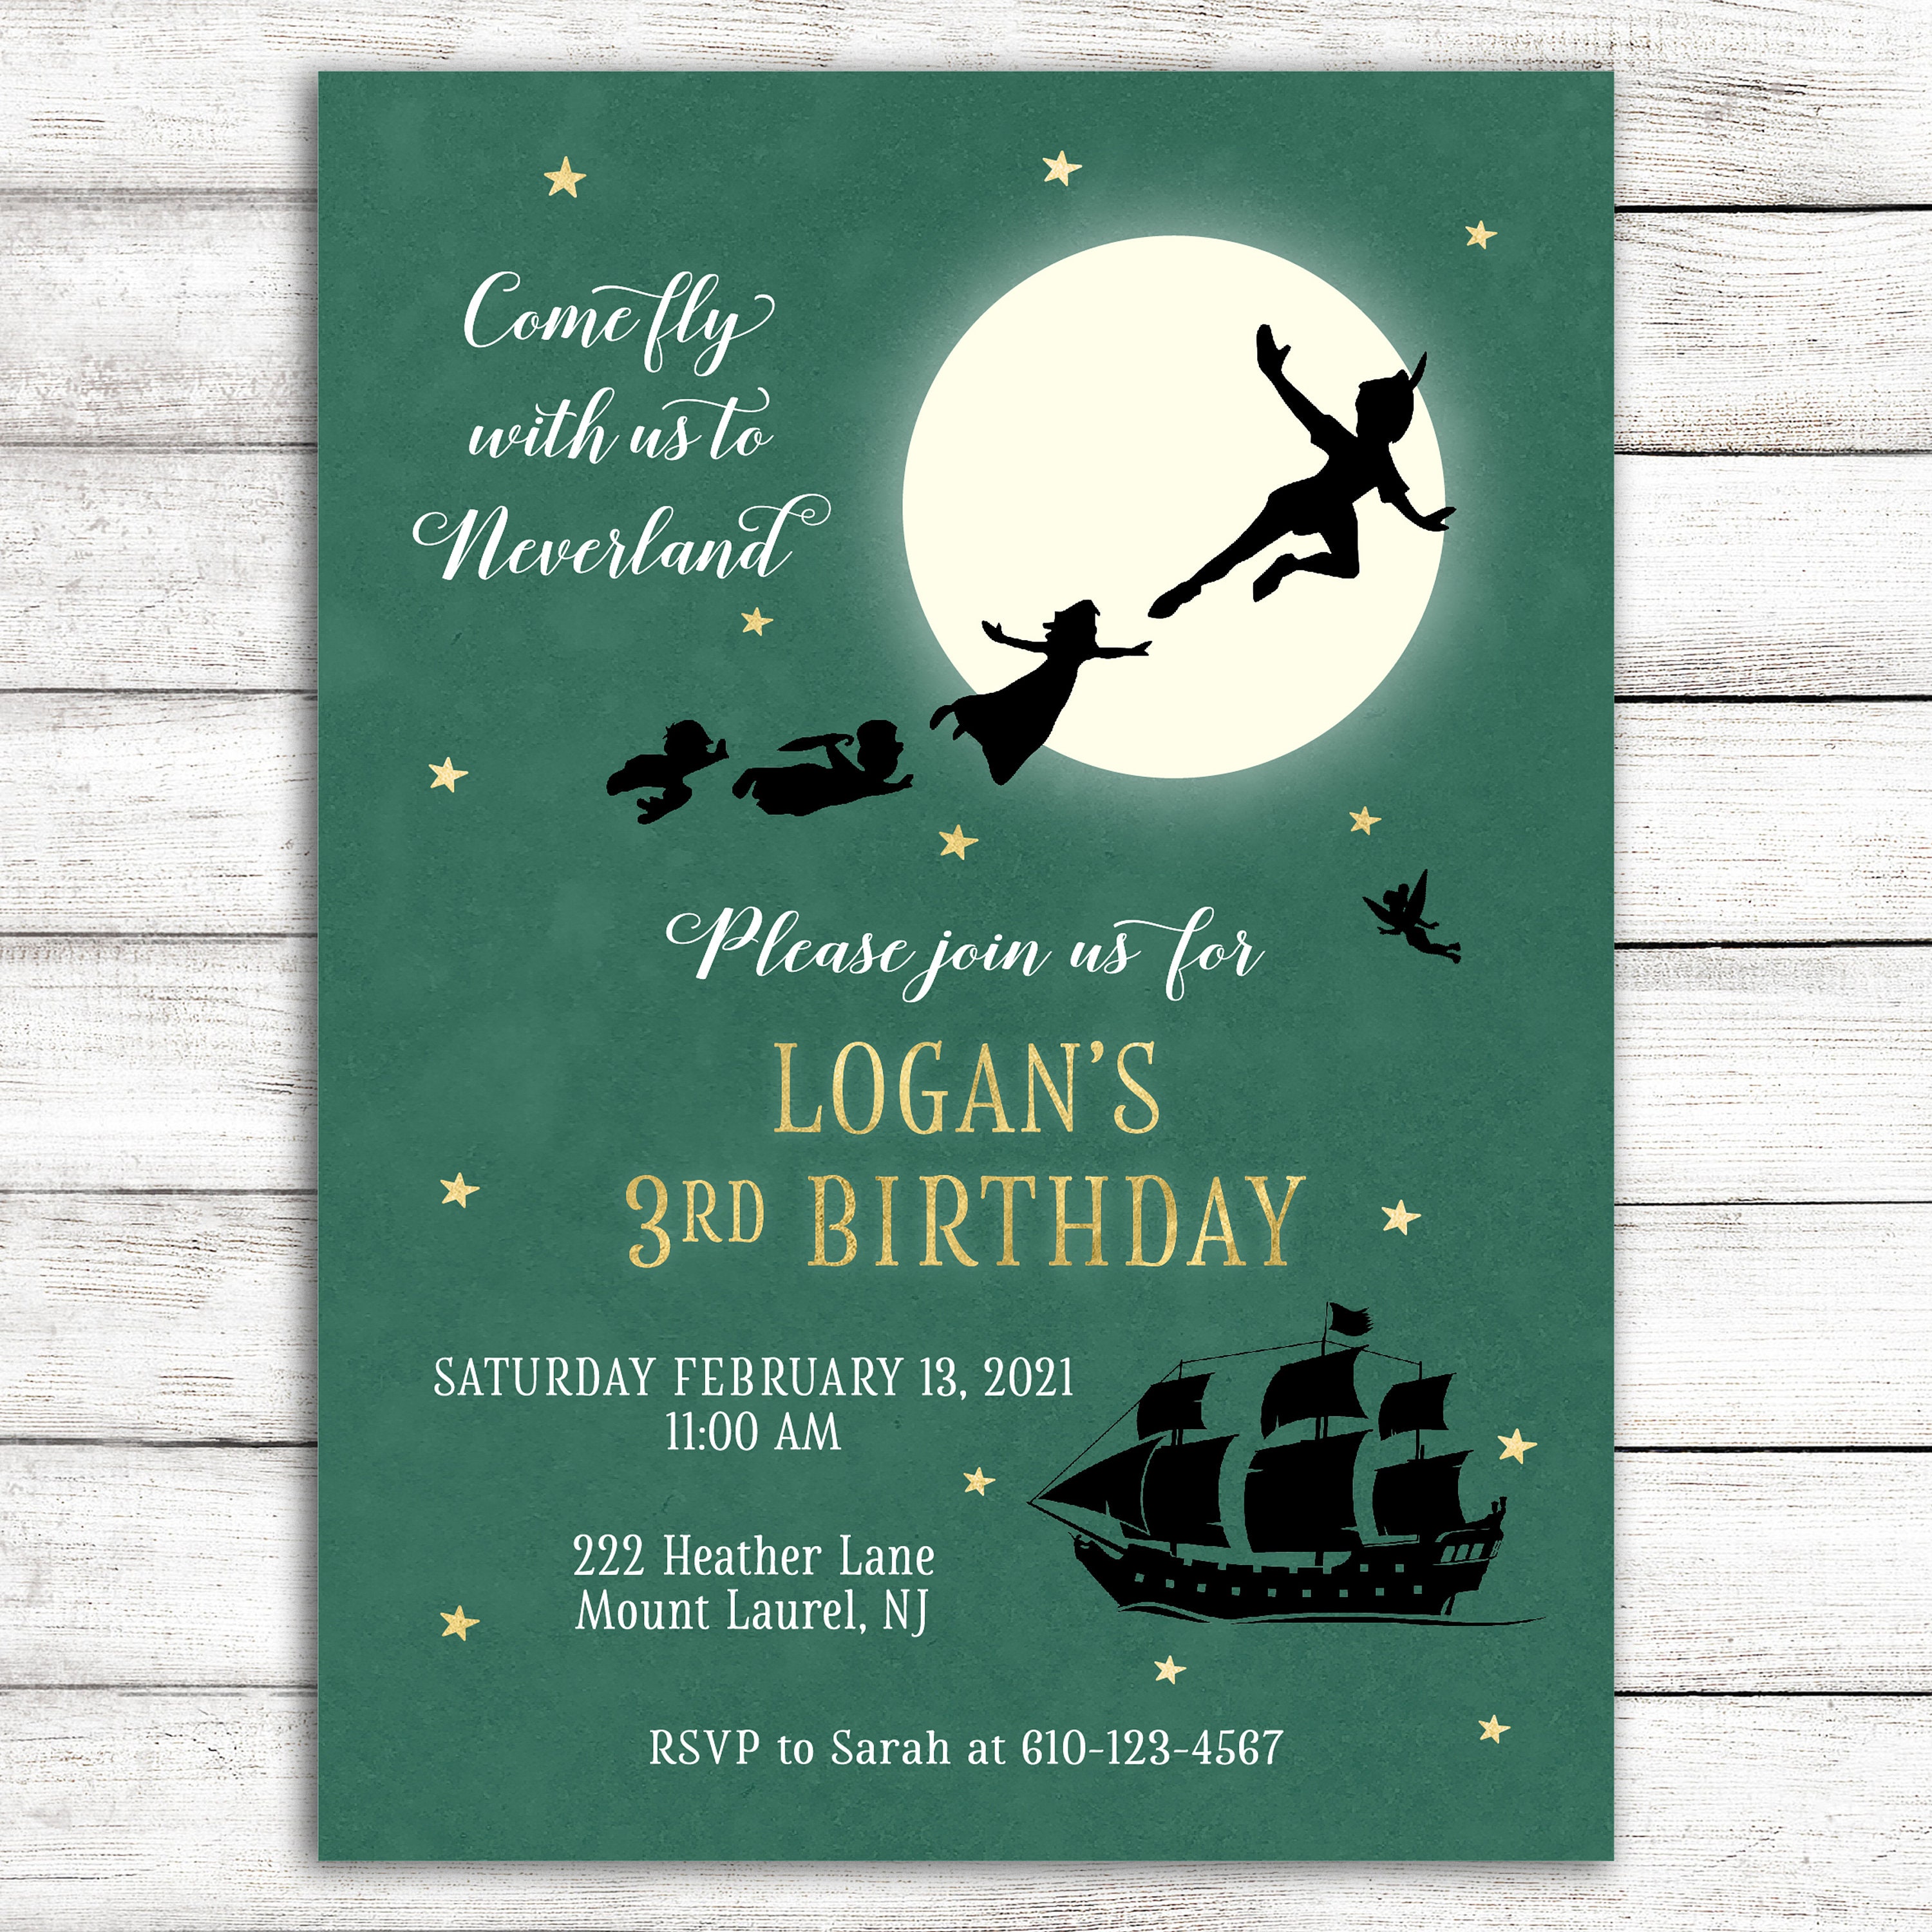 Hunter Green Peter Pan Party Invitation / Green Neverland Party Invitation